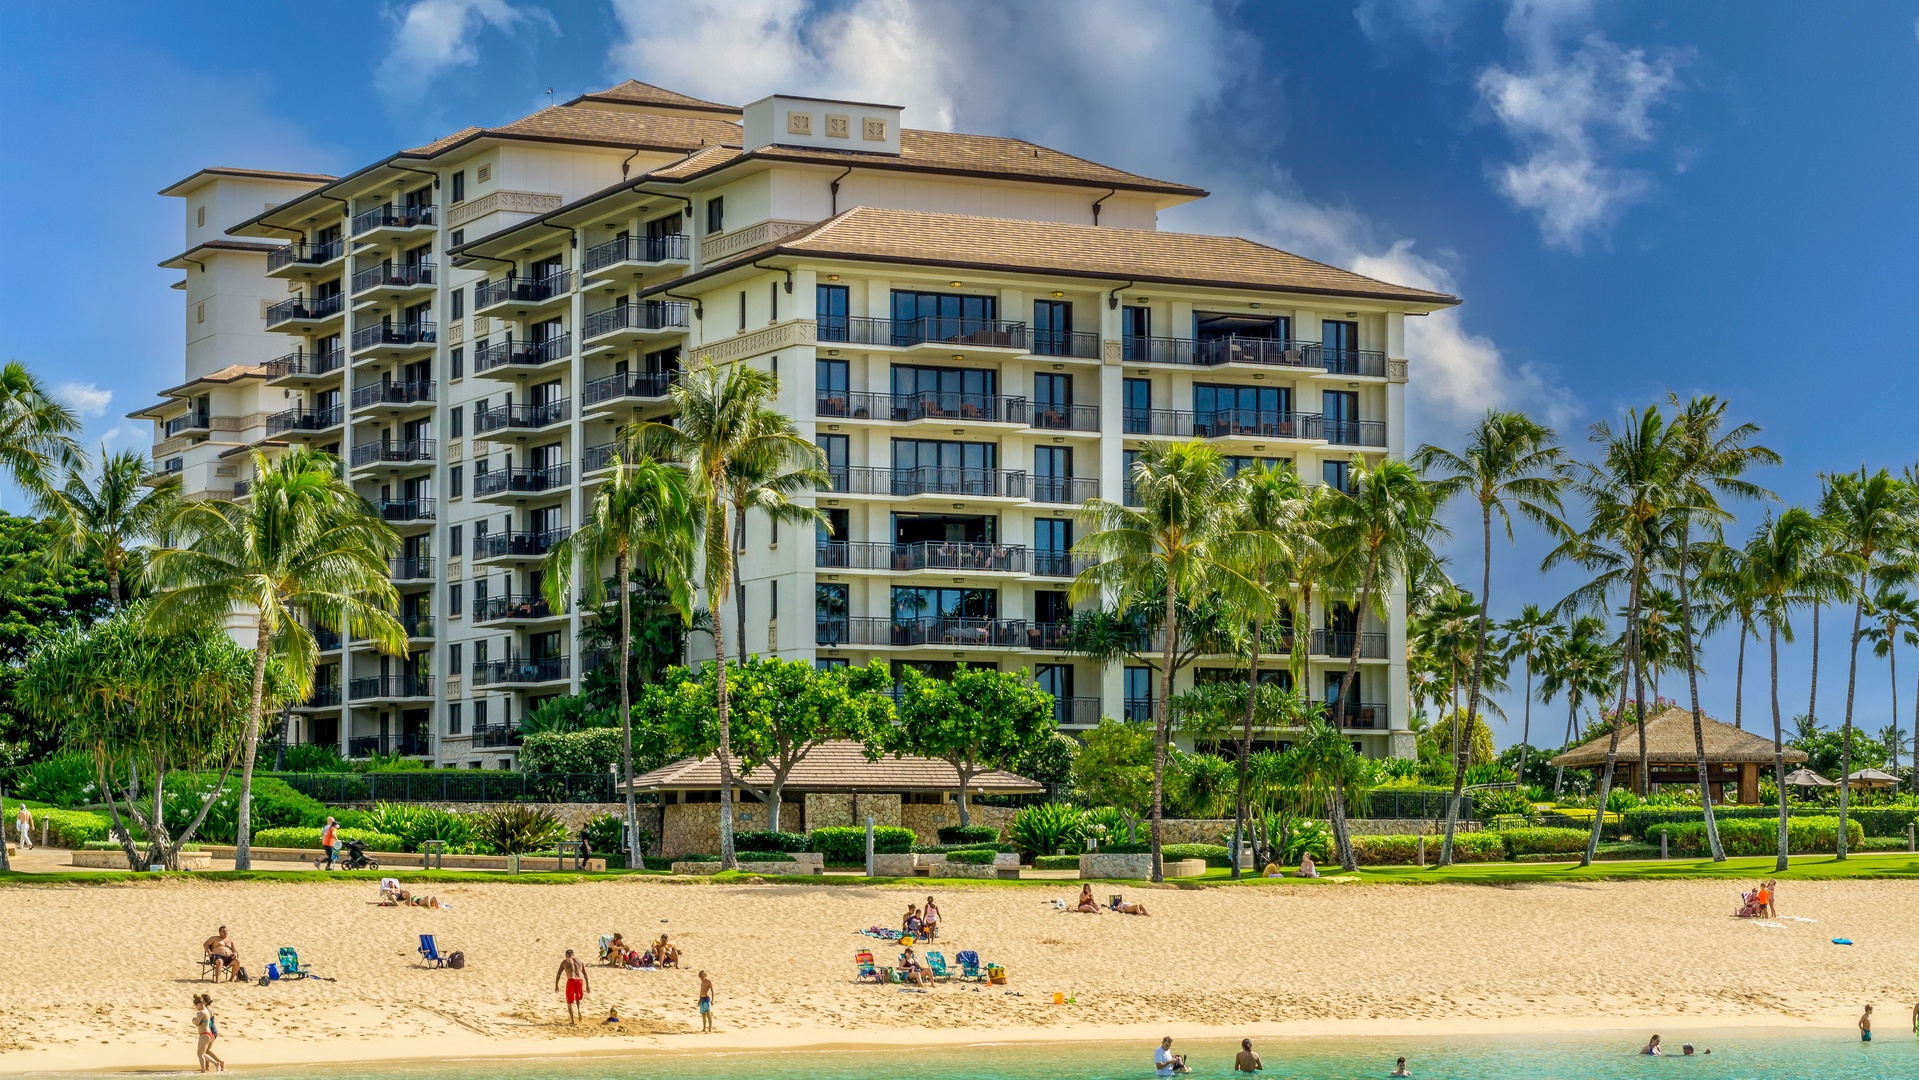 Kapolei Vacation Rentals, Ko Olina Beach Villas O904 - Another aerial review of the resort and sandy beaches.